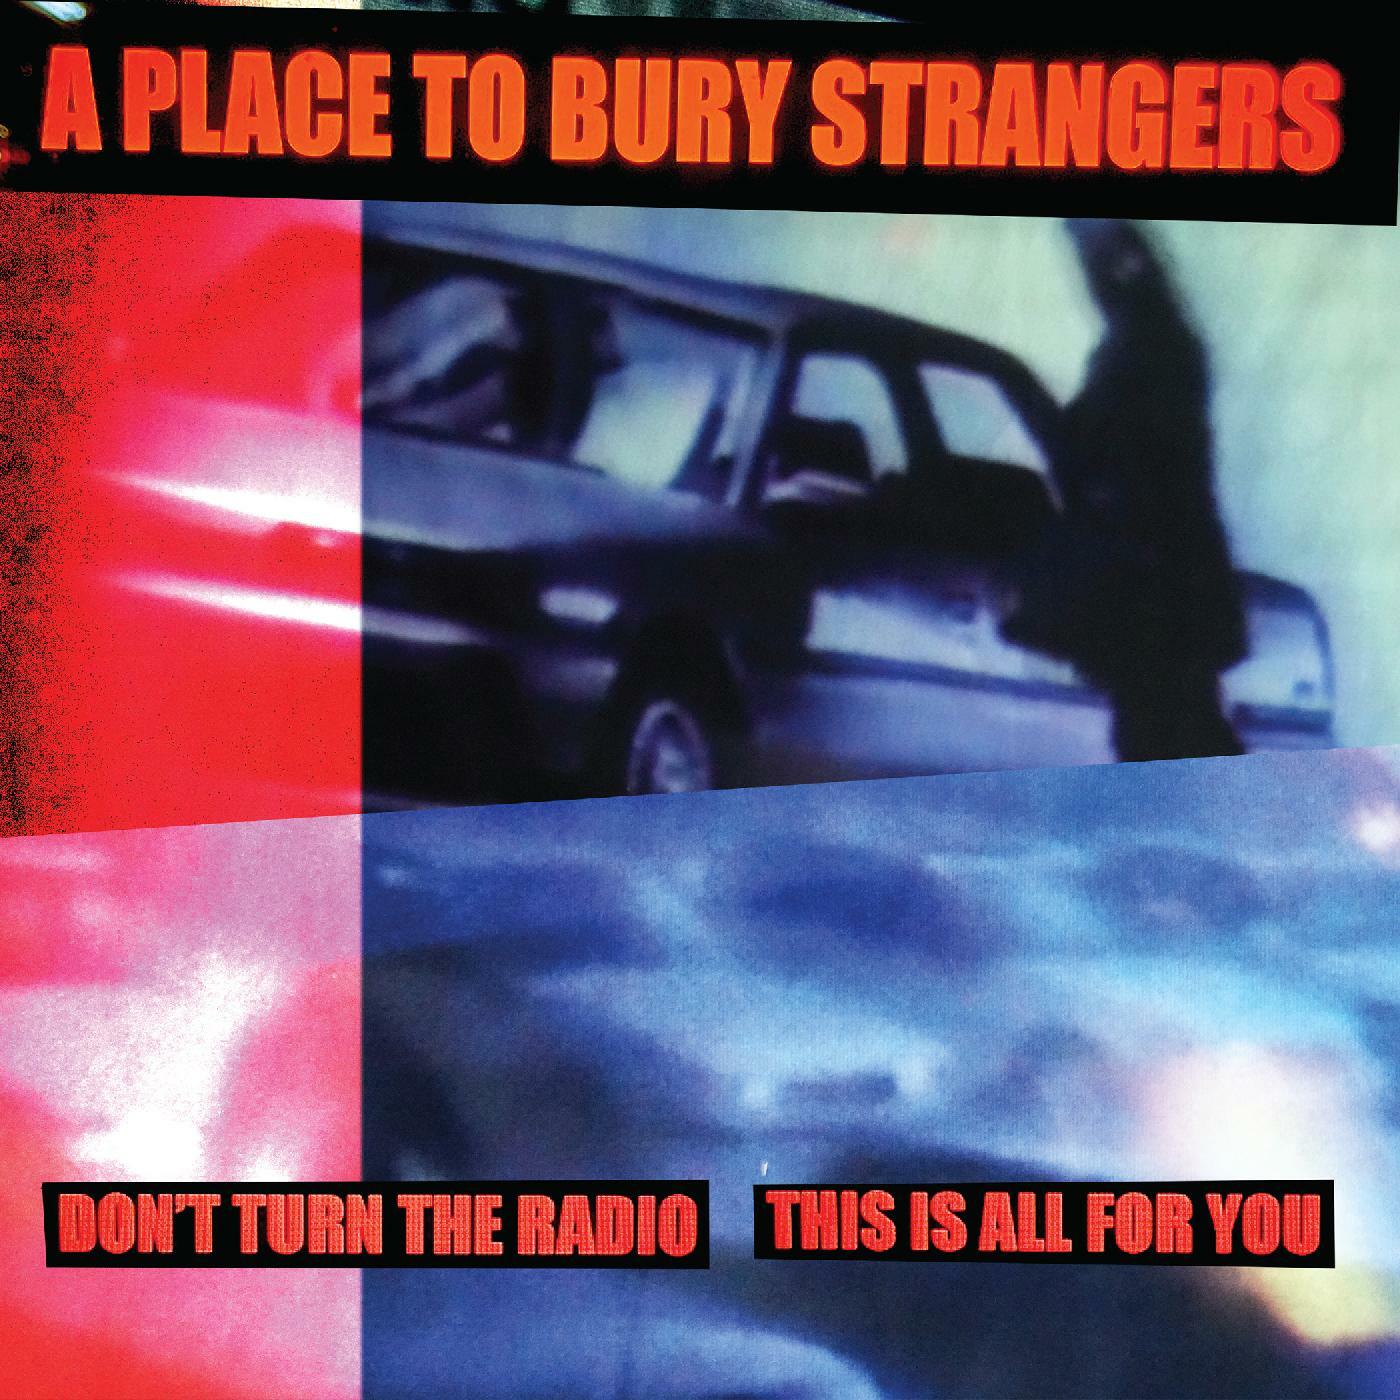 A Place to Bury Strangers - This Is All For You